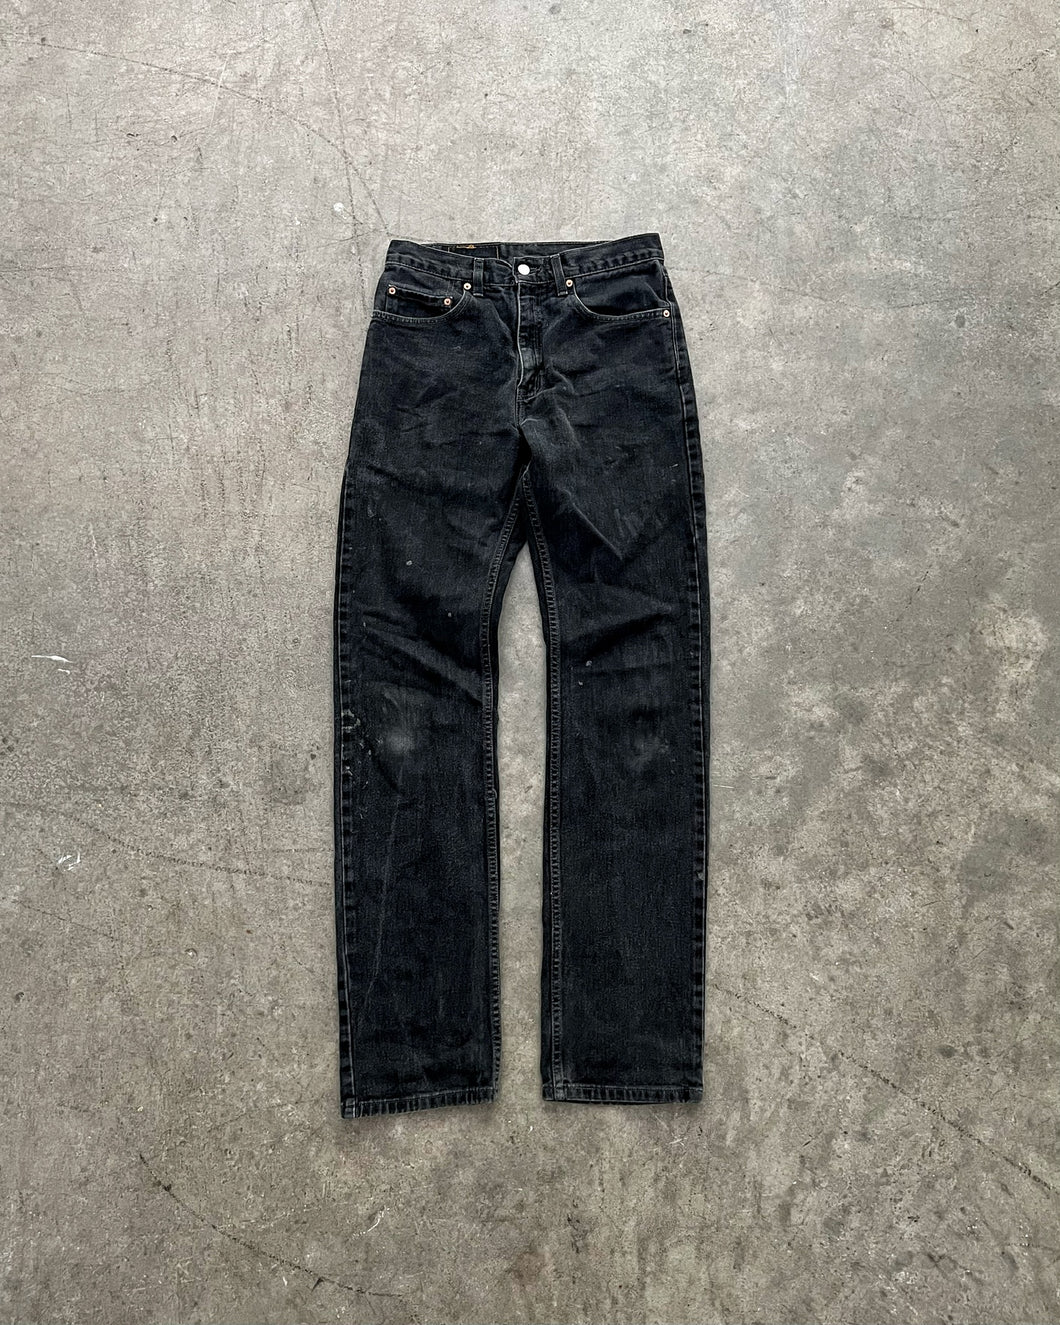 LEVI’S 505 FADED BLACK JEANS - 1990S